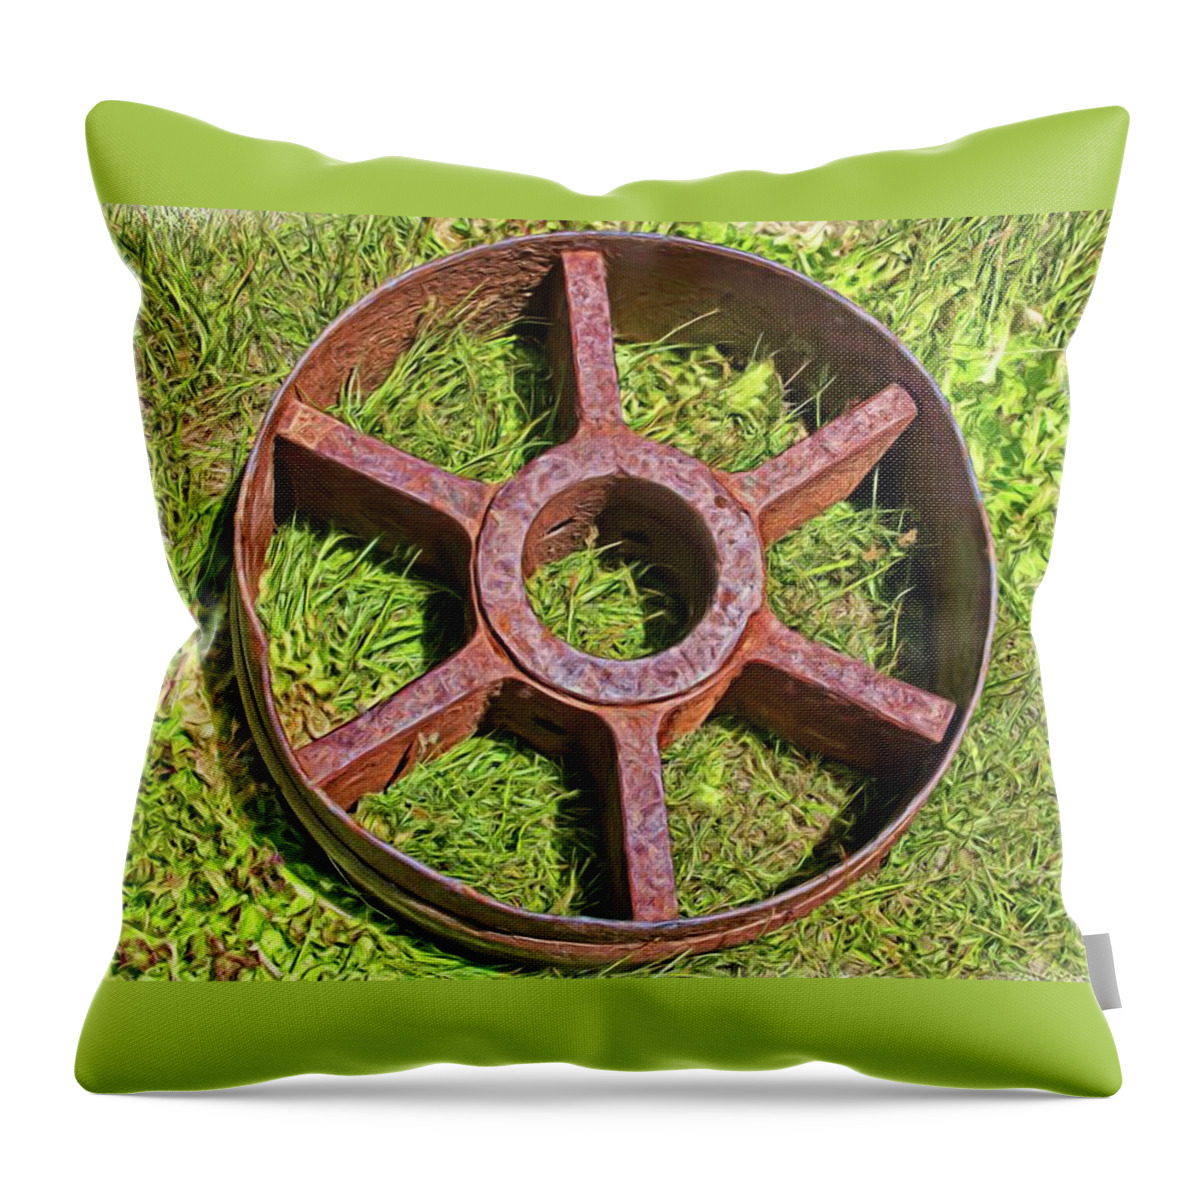 Abandoned Throw Pillow featuring the digital art Wheel From The Past by David Desautel